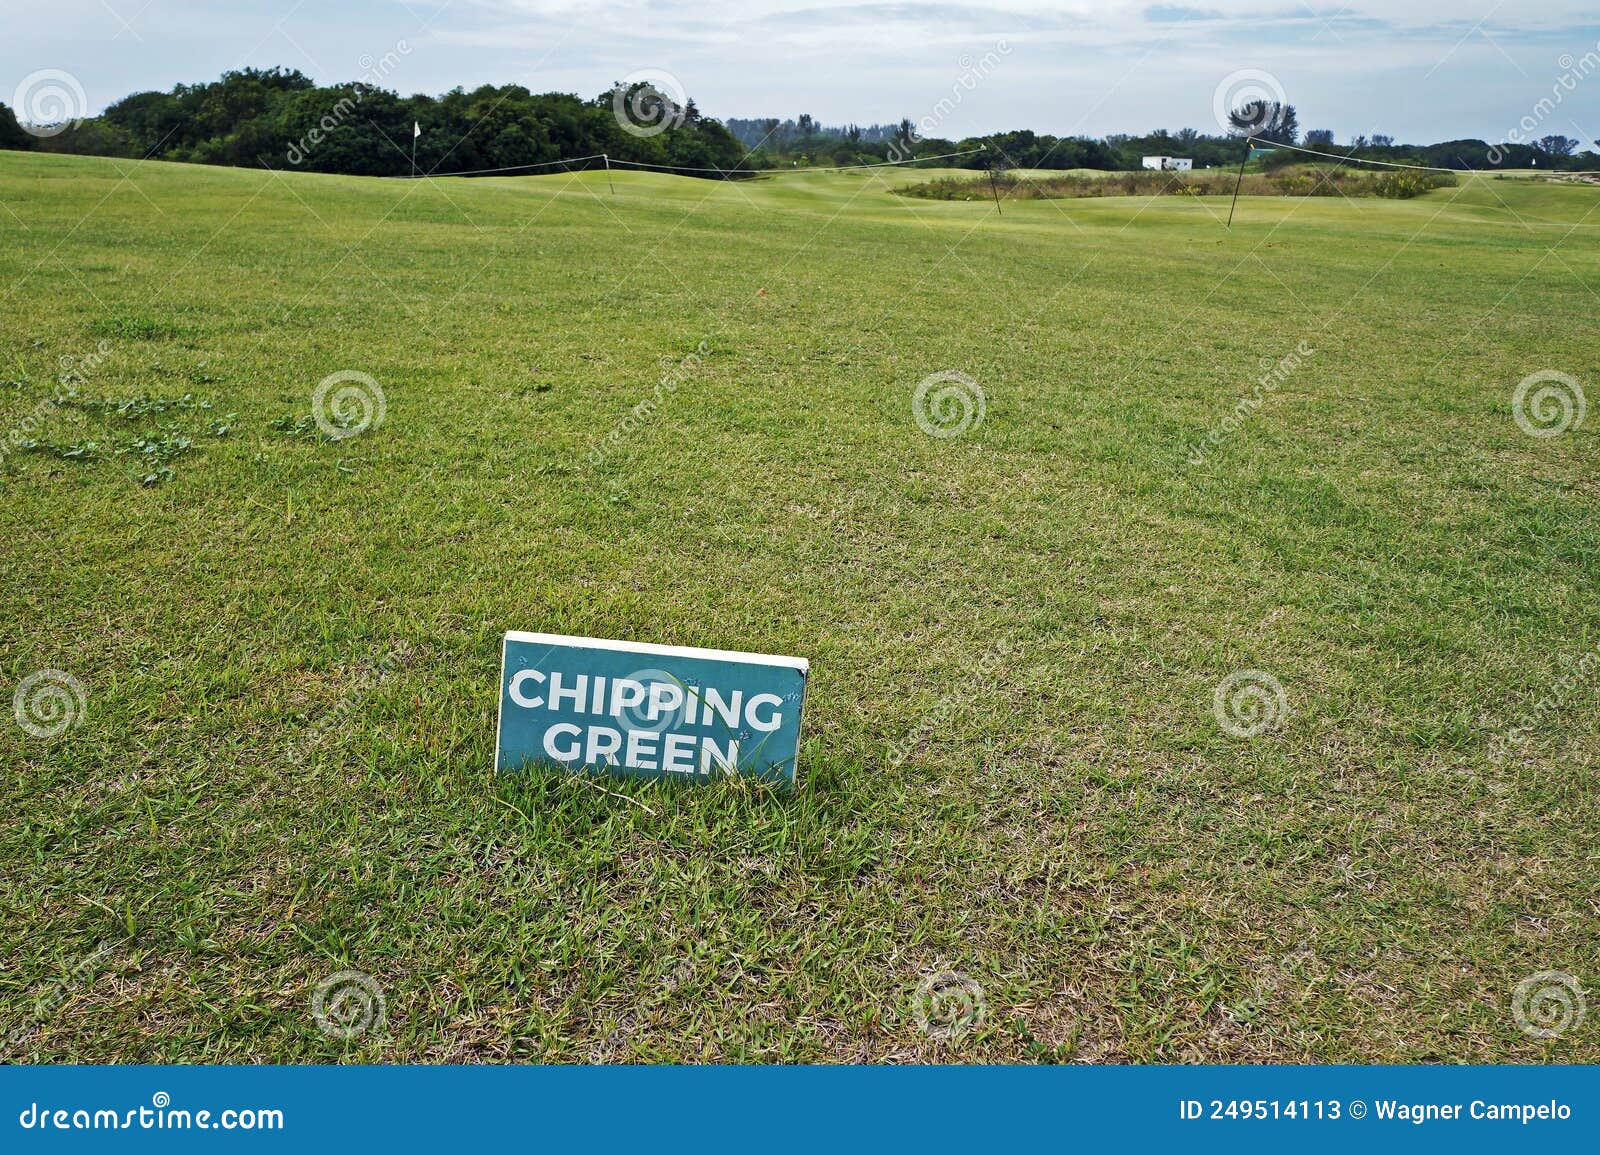 chipping green, text in a signboard over the grass on golf course, rio